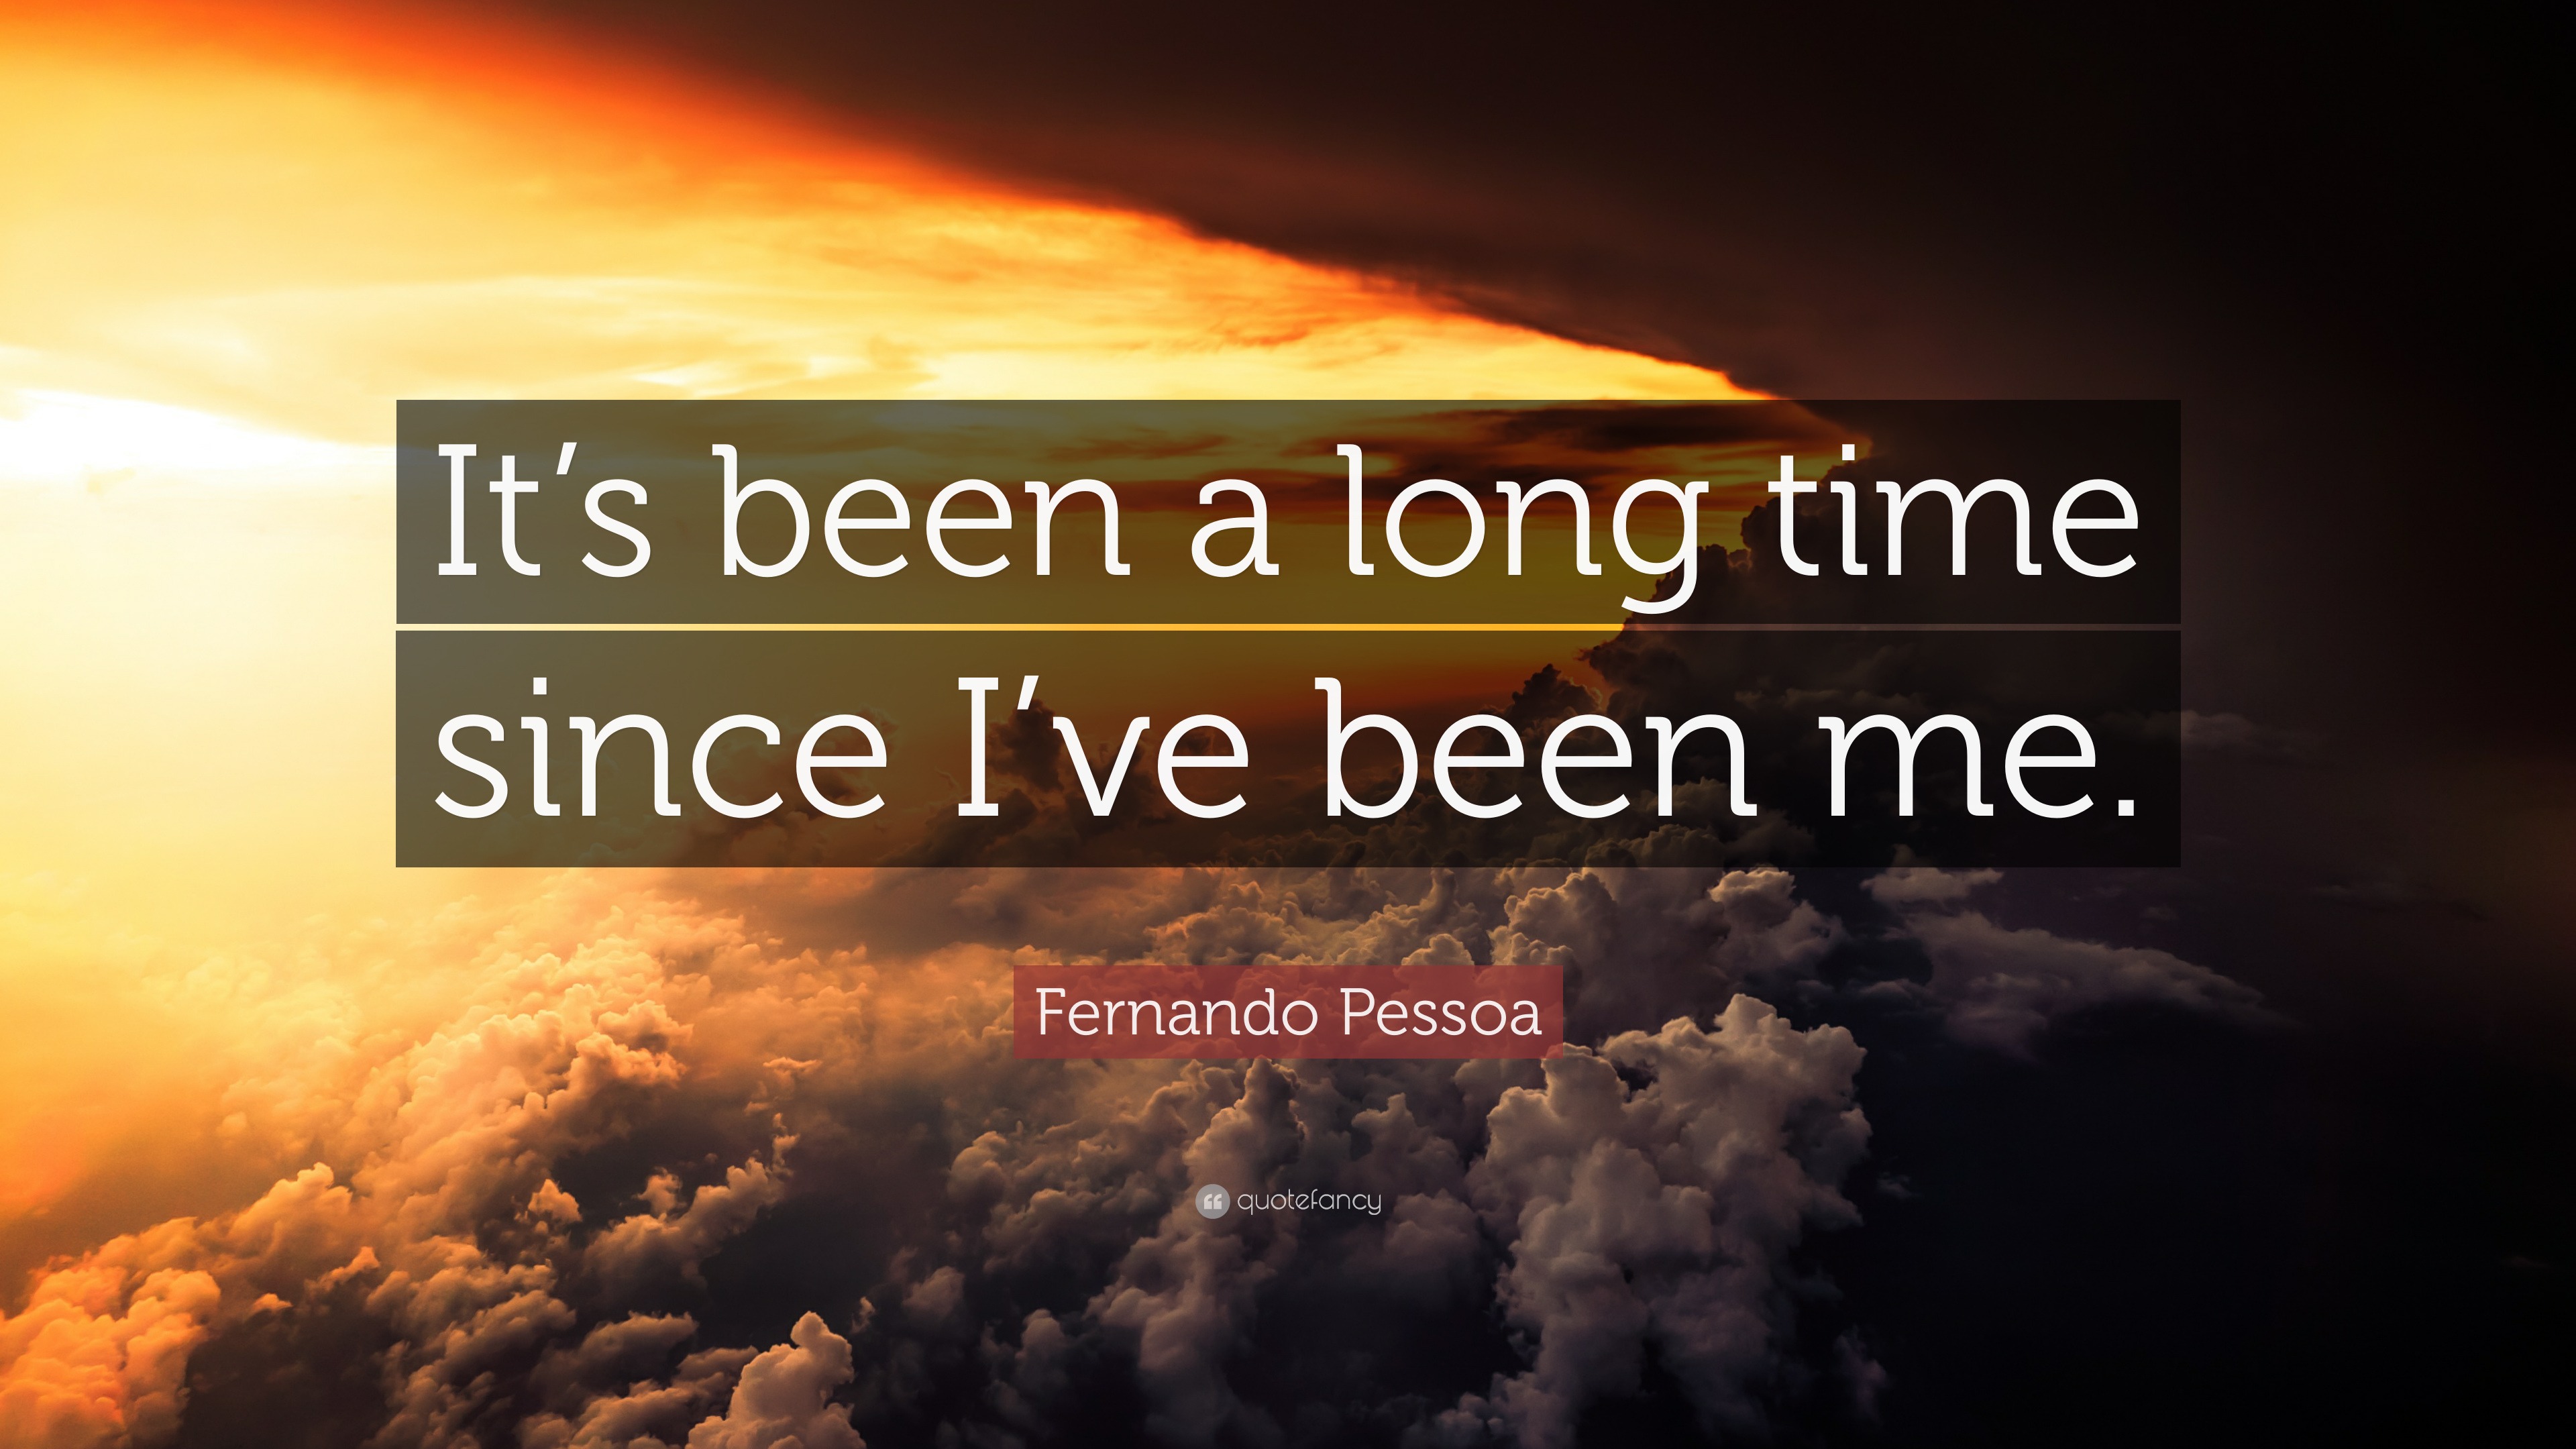 Fernando Pessoa quote: It's been a long time since I've been me.